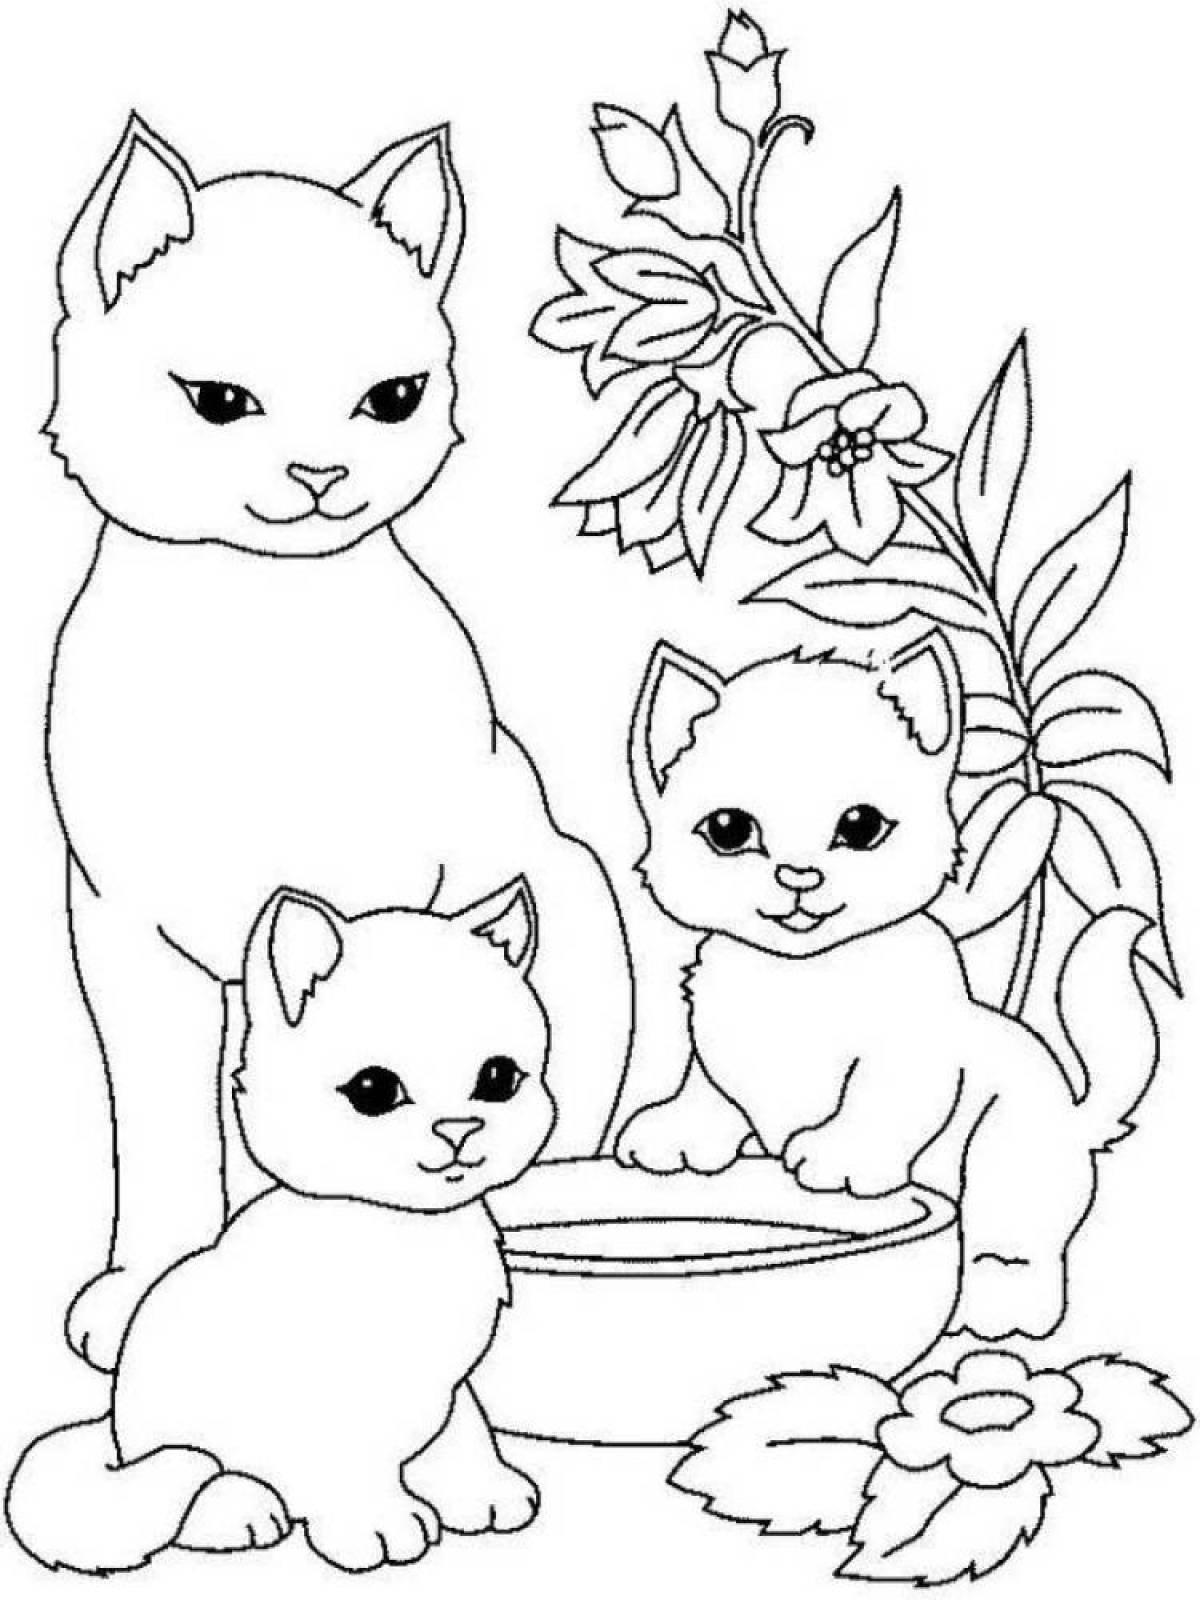 Elegant coloring cat with kittens